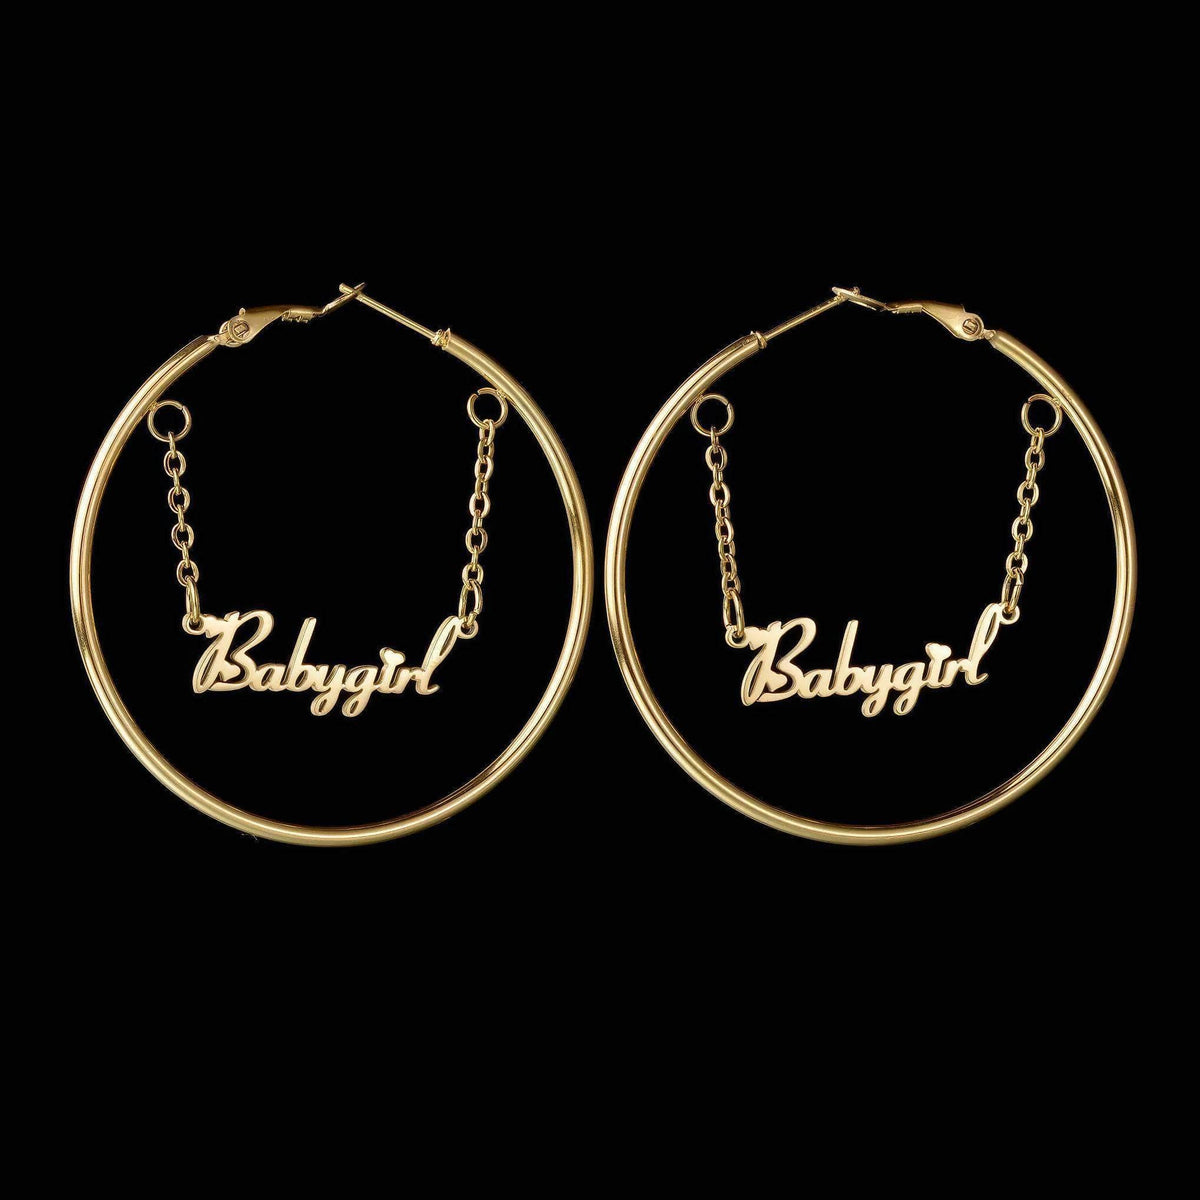 Personalized Custom Name Earrings with Chain - Stainless Steel for Women, featuring Letters Nameplate for a fashionable Birthday Jewelry Gift gold color / 25cm